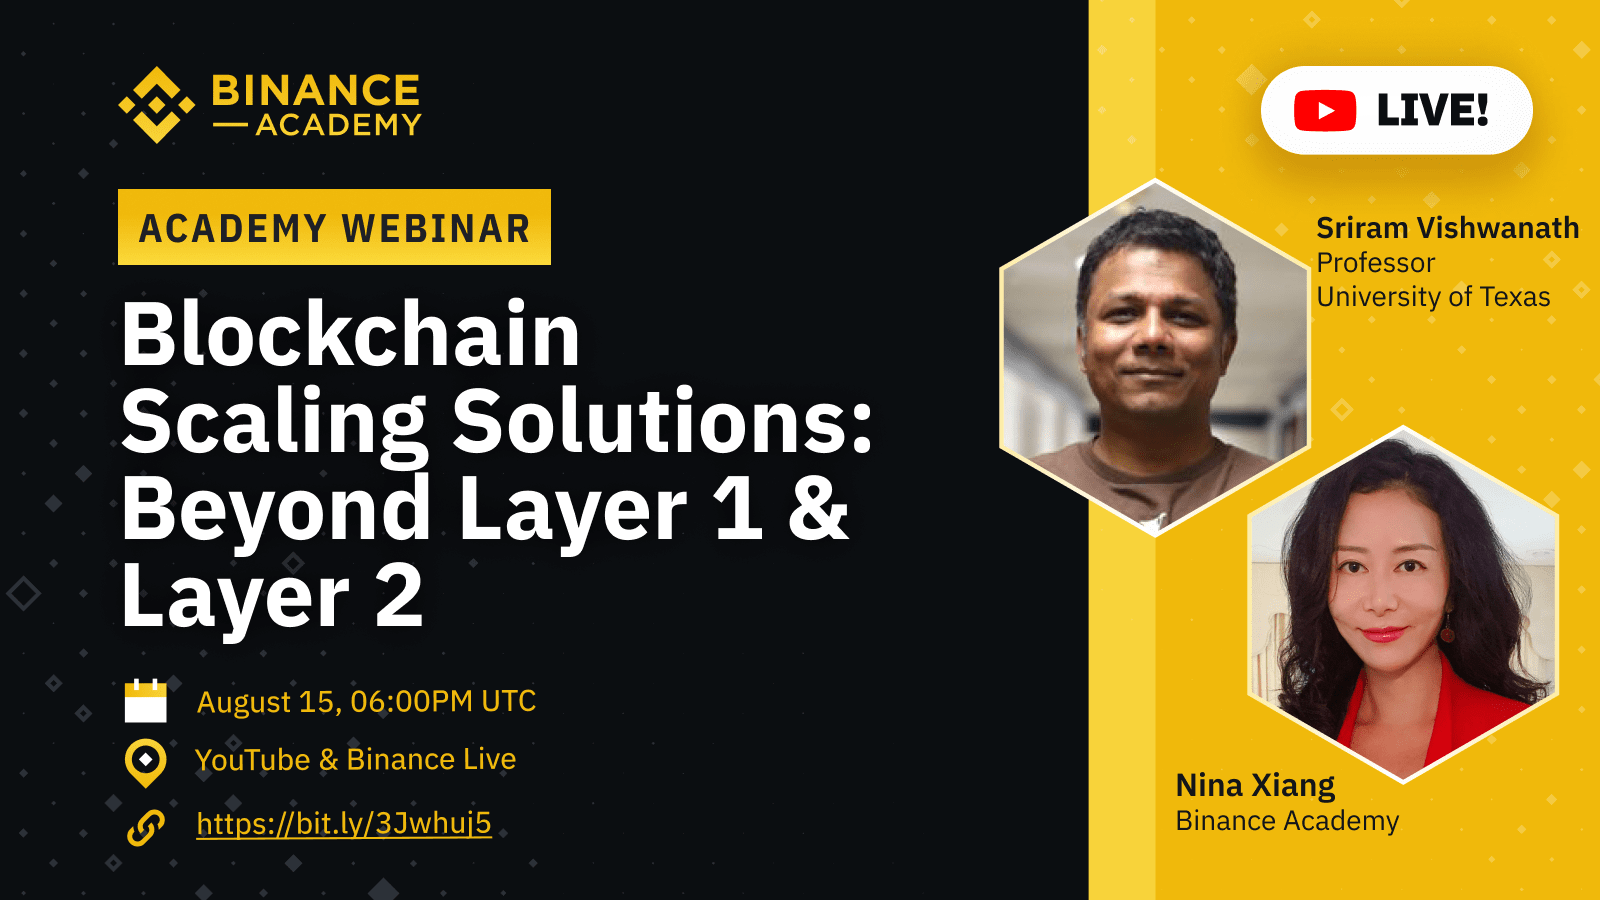 Blockchain Scaling Solutions: Beyond Layer 1 & Layer 2